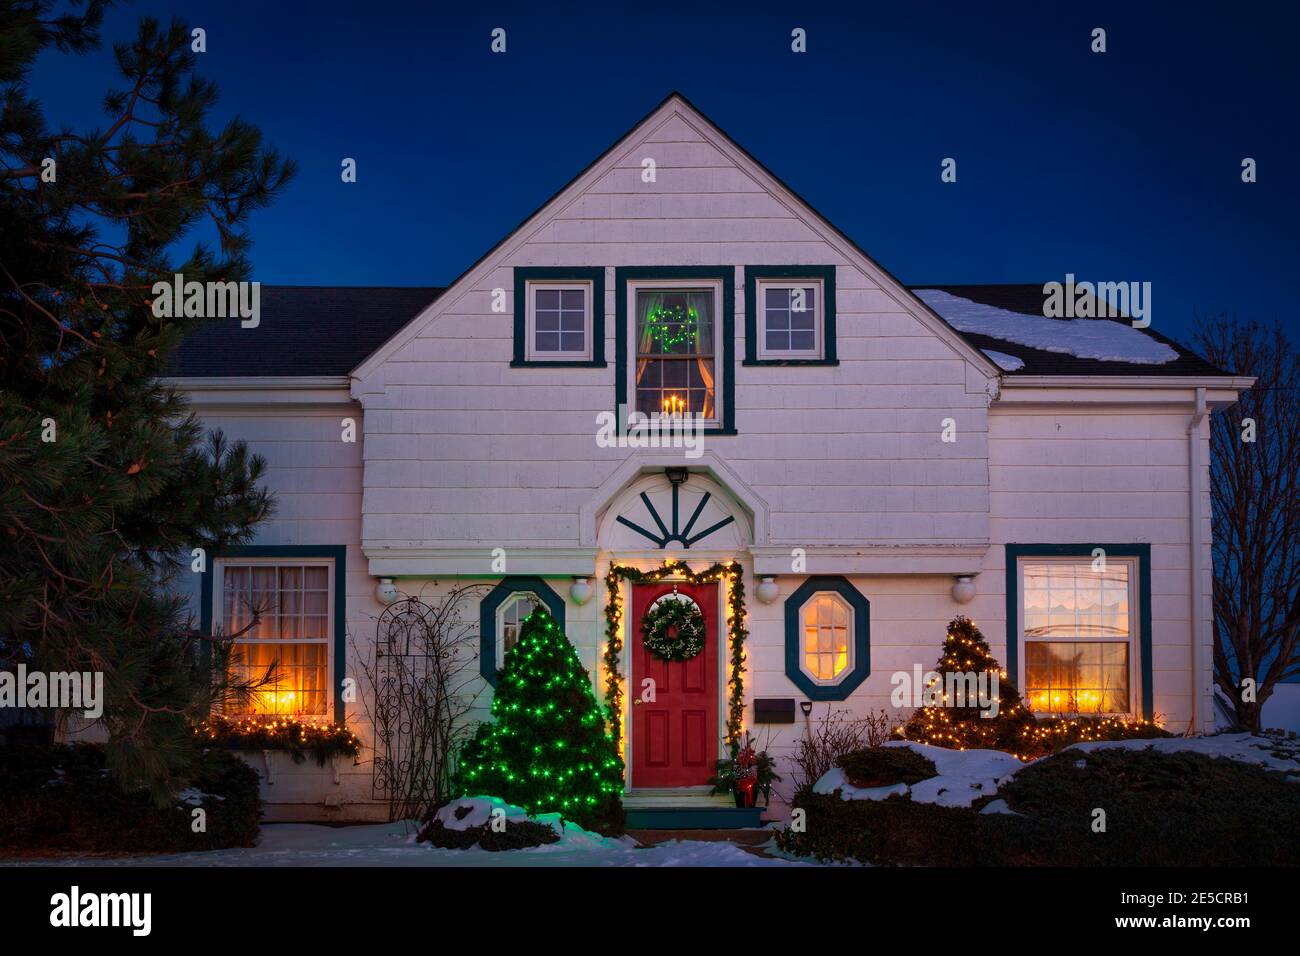 A tradional North American home decorated for Christmas. Stock Photo